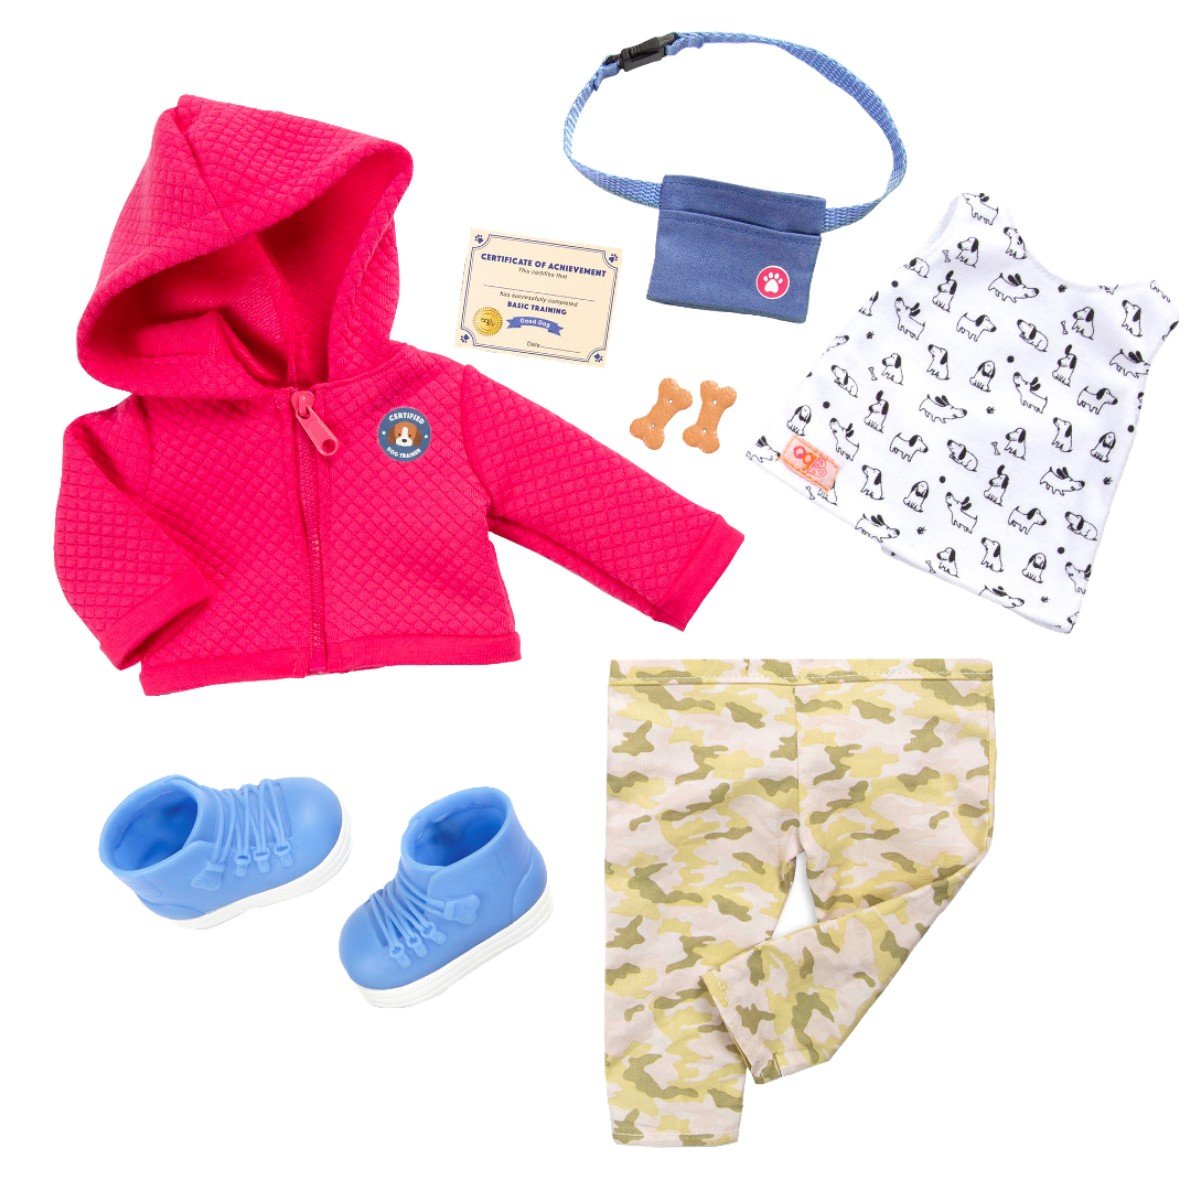 Our Generation - Dogtrainer Deluxe Doll Outfit (730417)